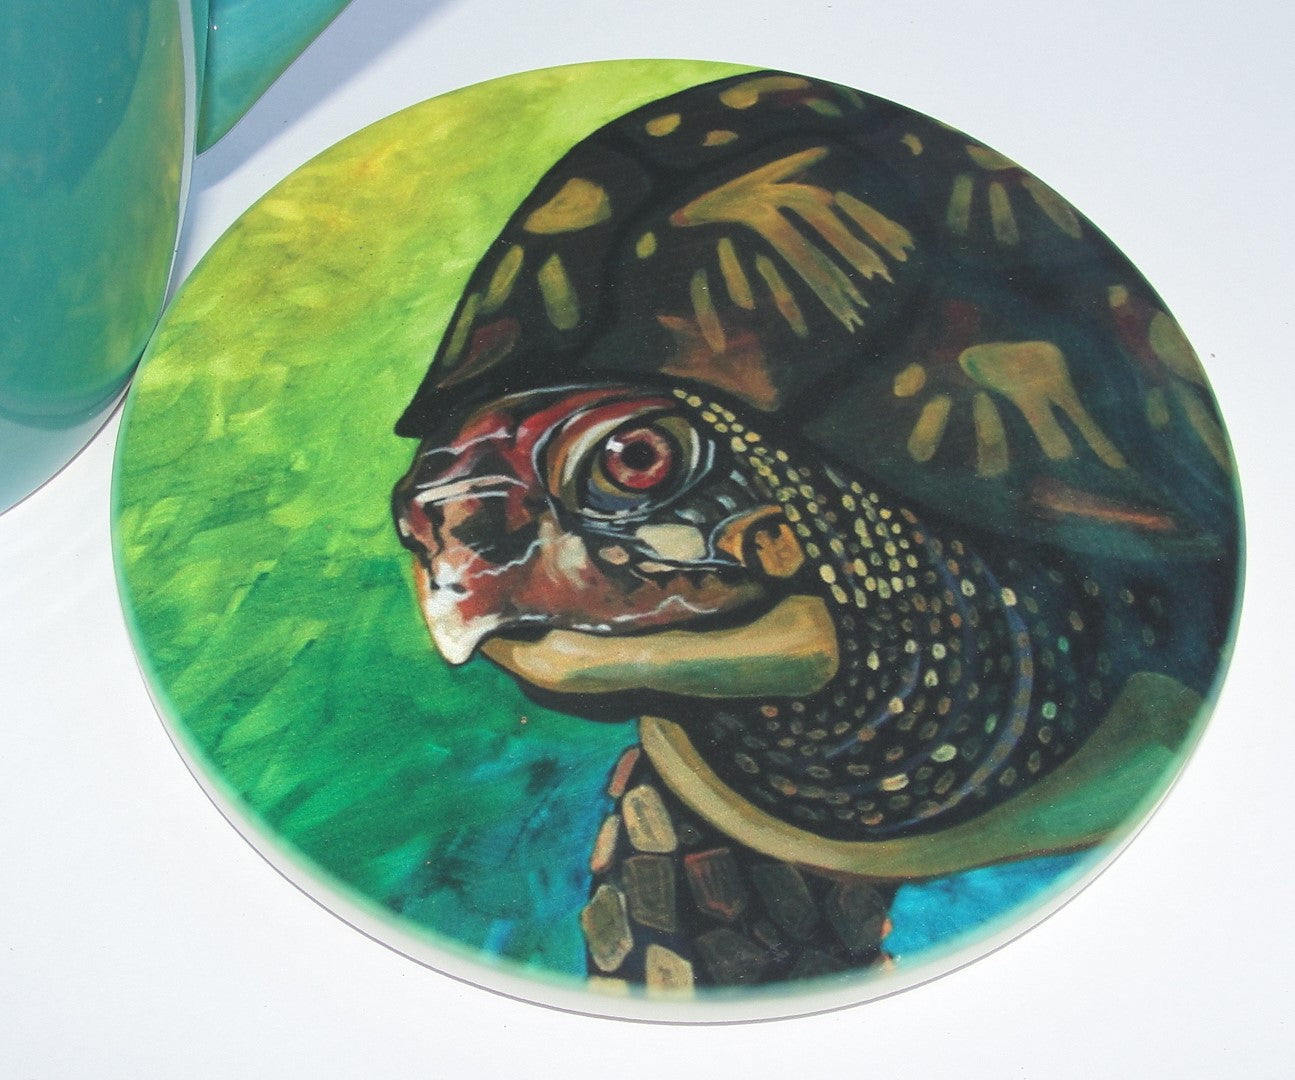 Coaster, Ceramic, Singles; Variety of images